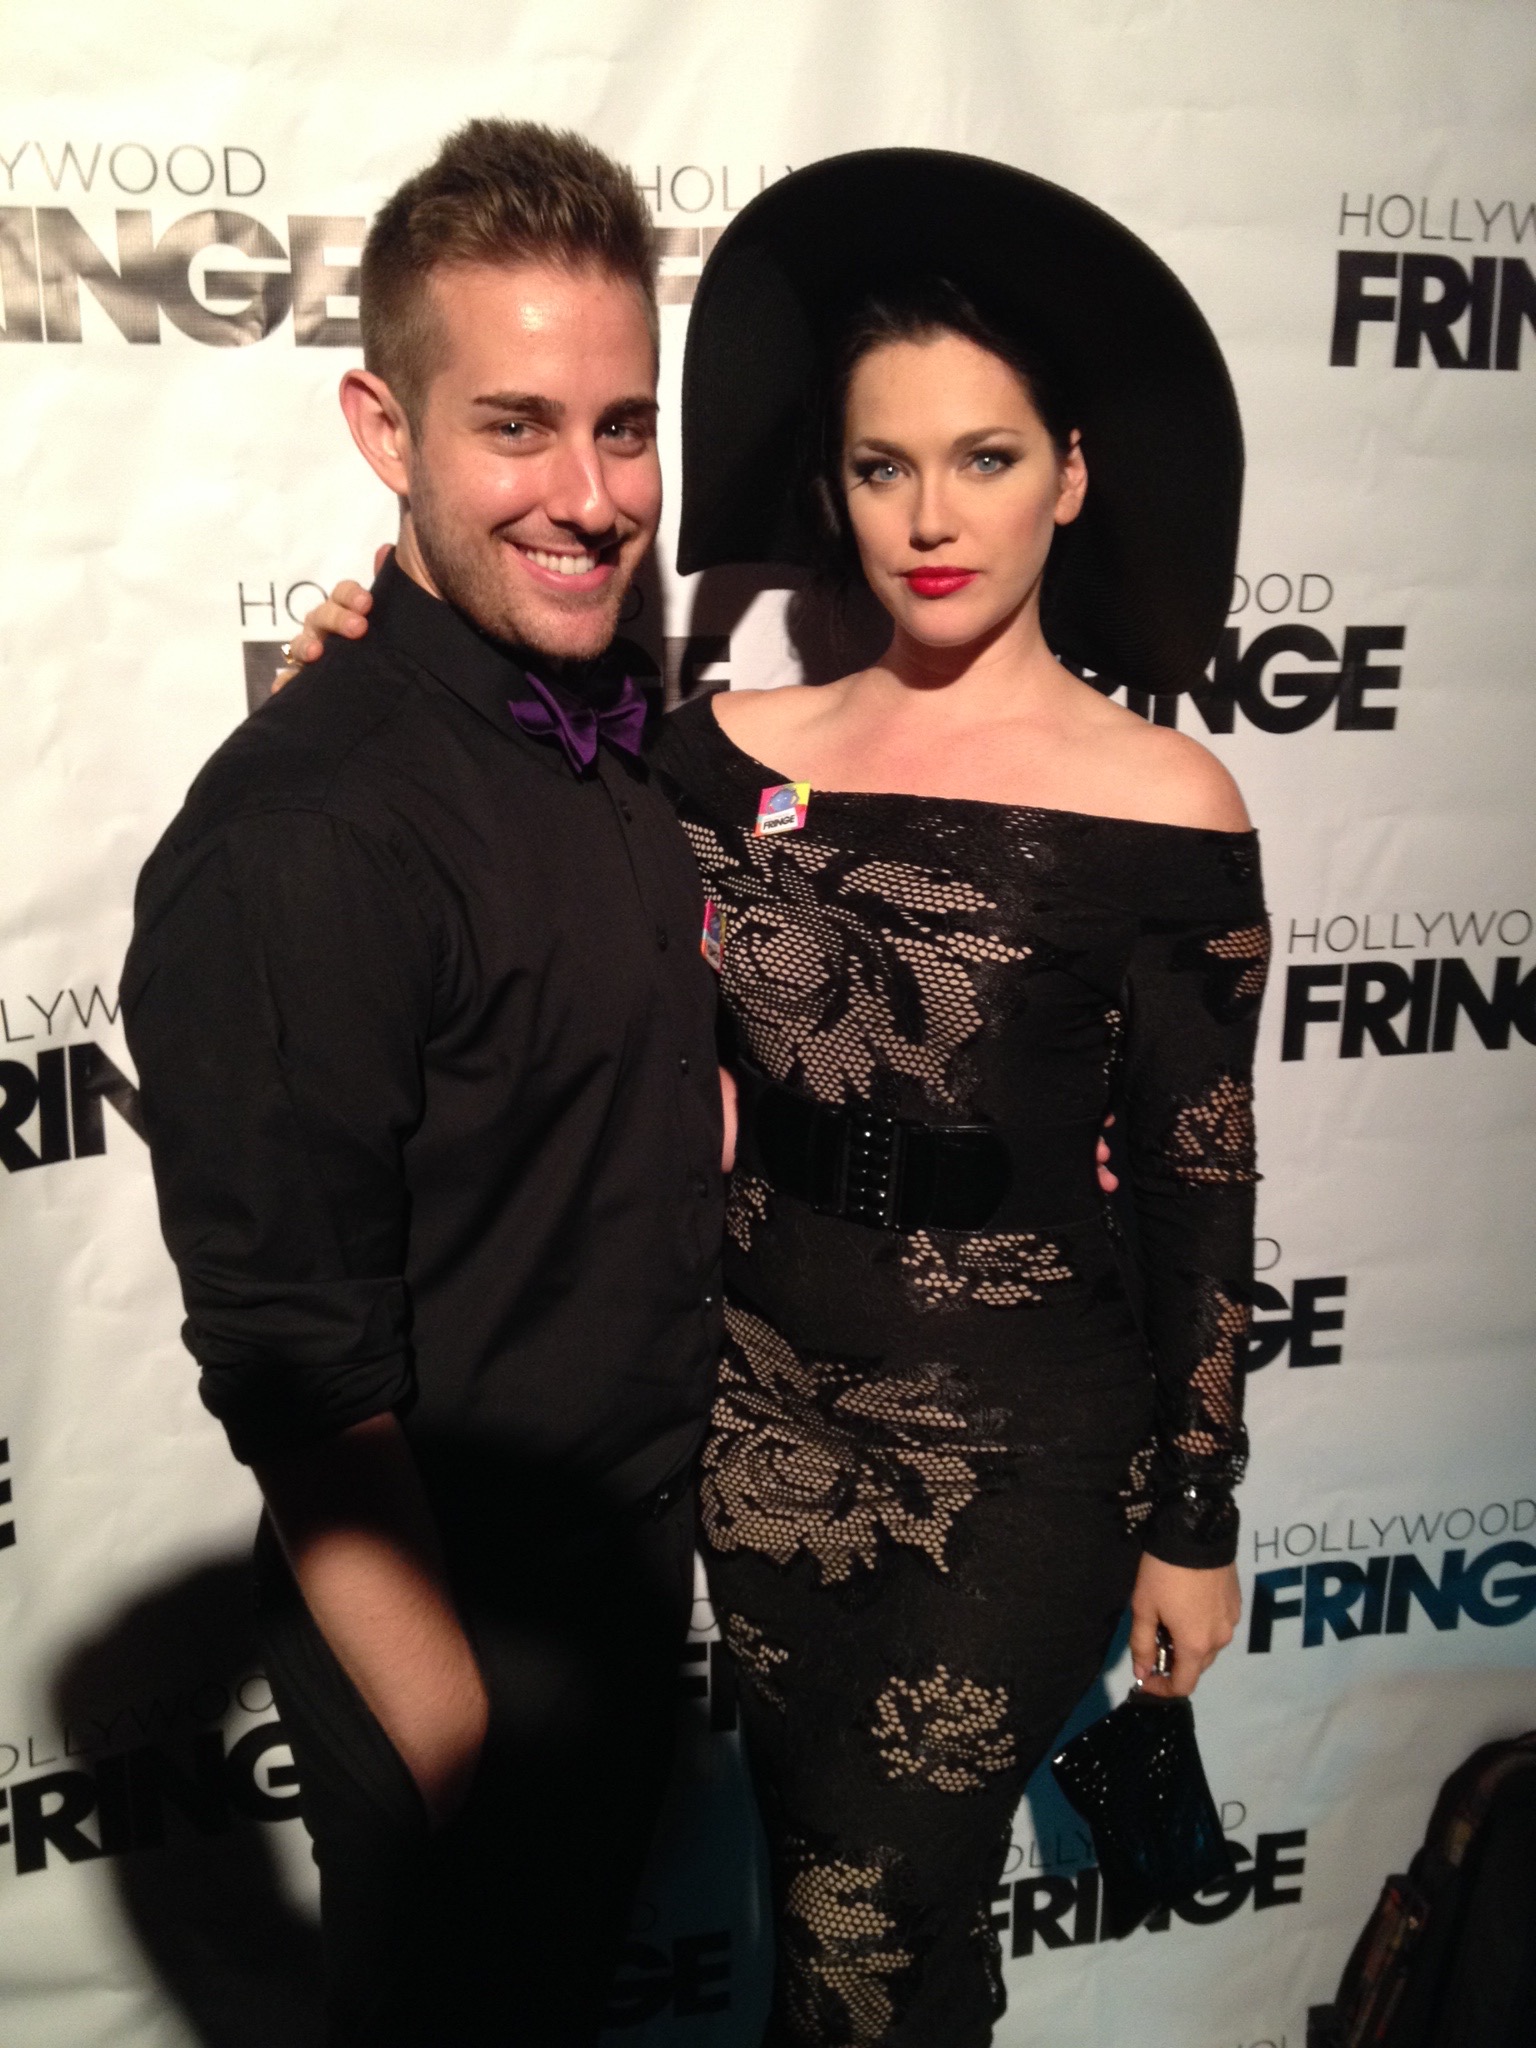 Red Carpet for The Hollywood Fringe Festival. (2014) Pictured with actor Garret Riley.